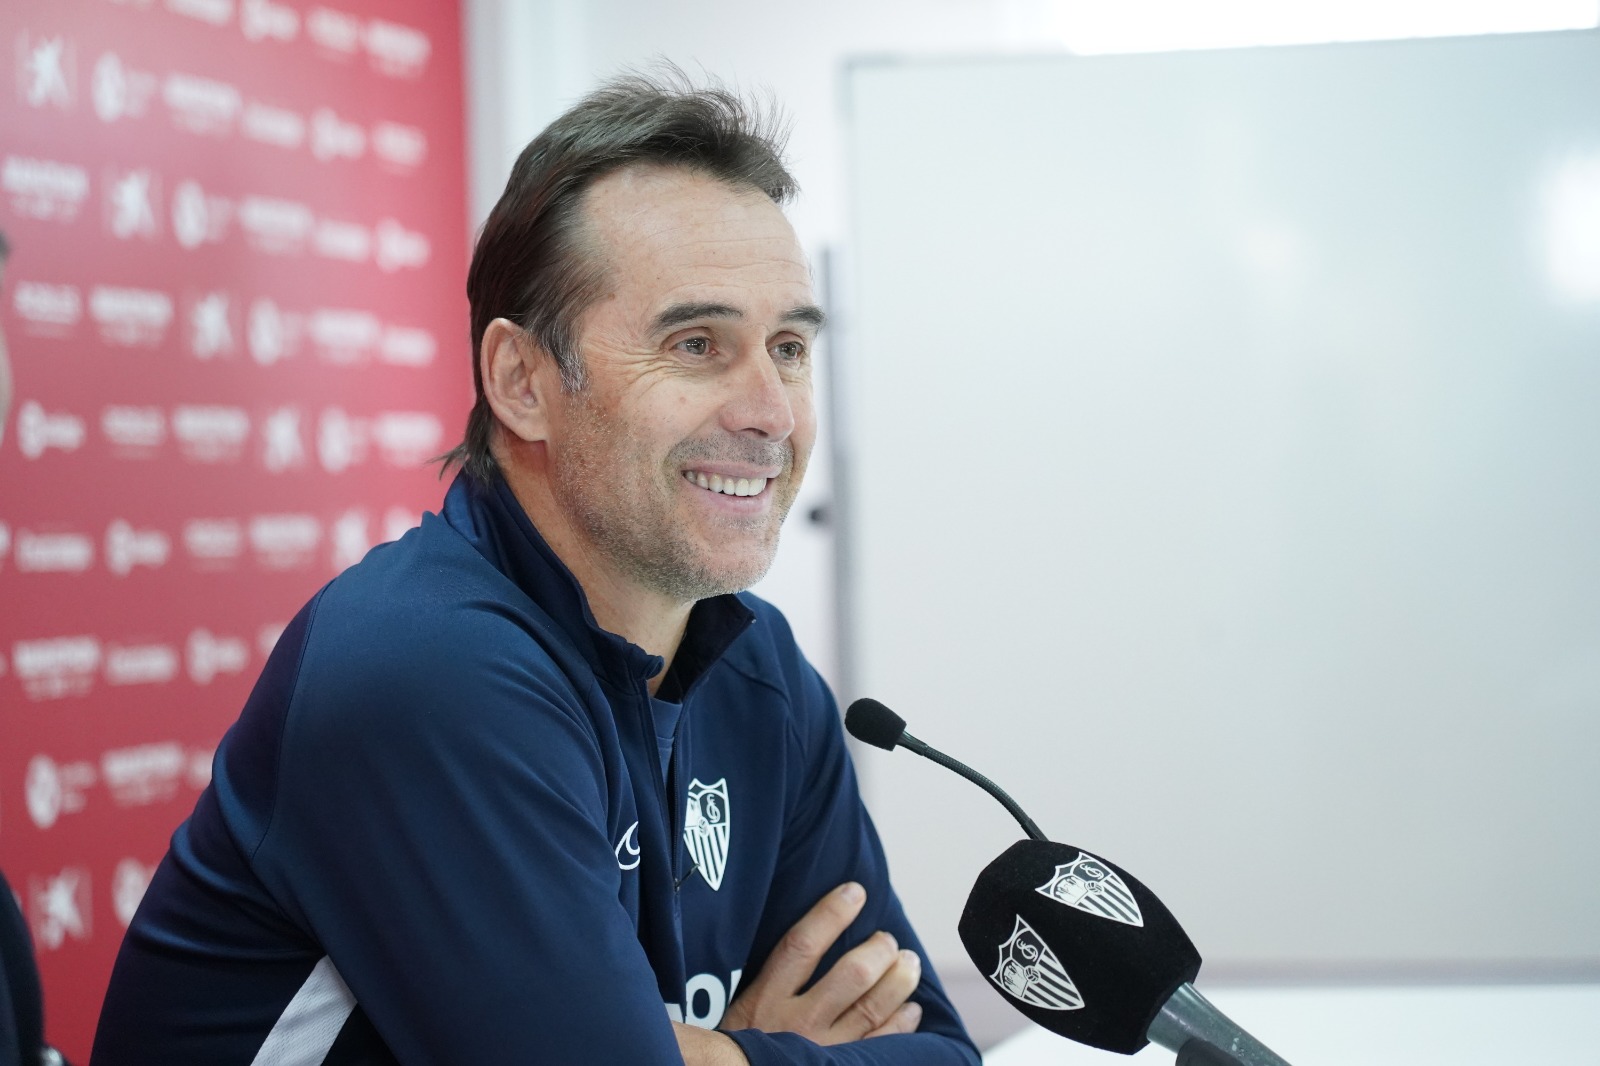 Lopetegui during the press conference before CD Mirandés 